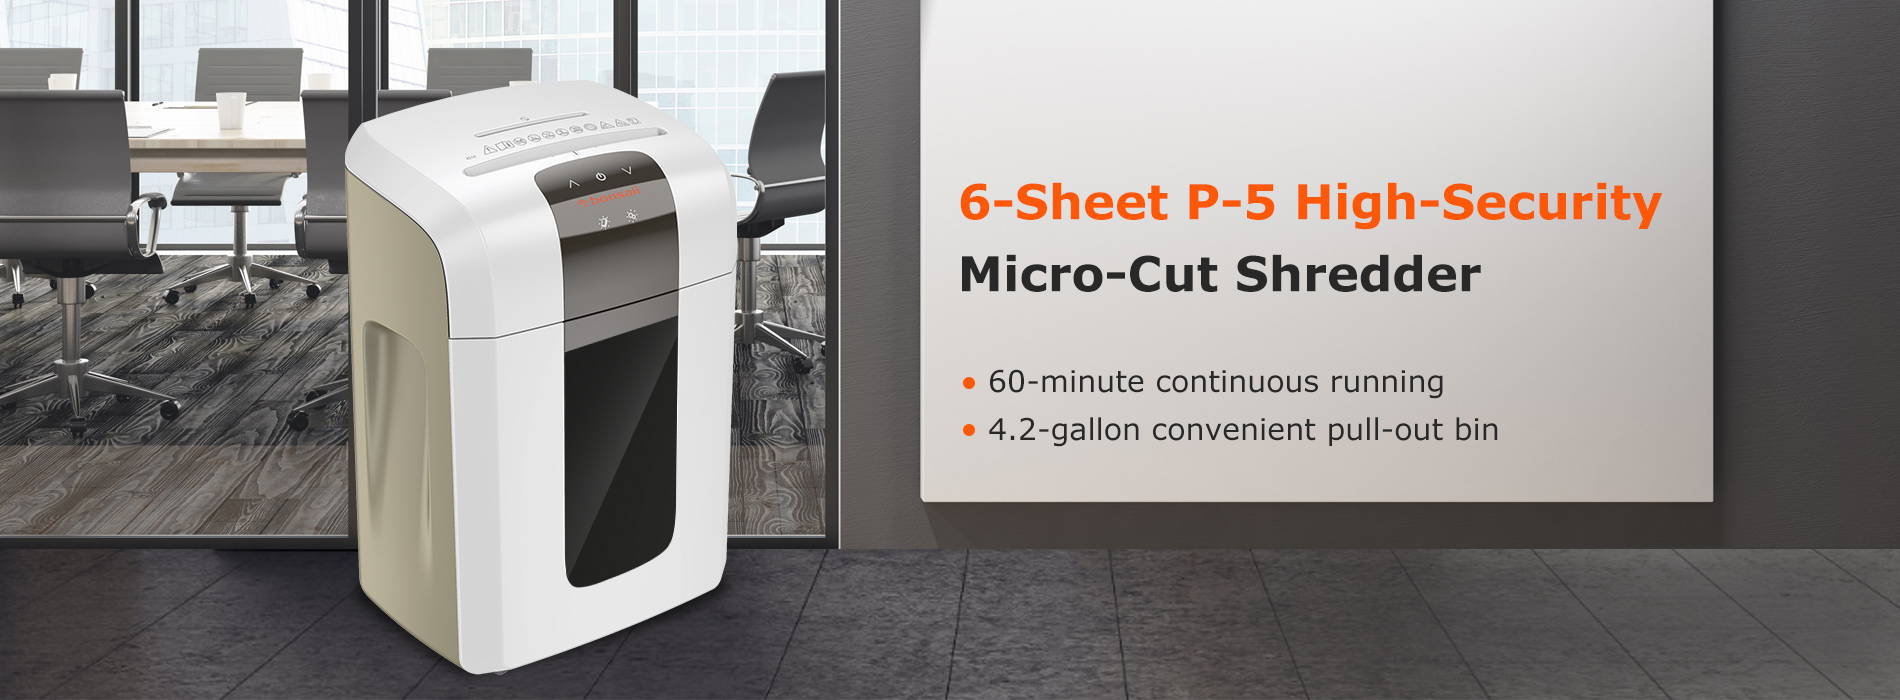 6-sheet P-5 high security micro-cut shredder- 60 minutes continuous running 4.2-gallon convenient pull-out bin